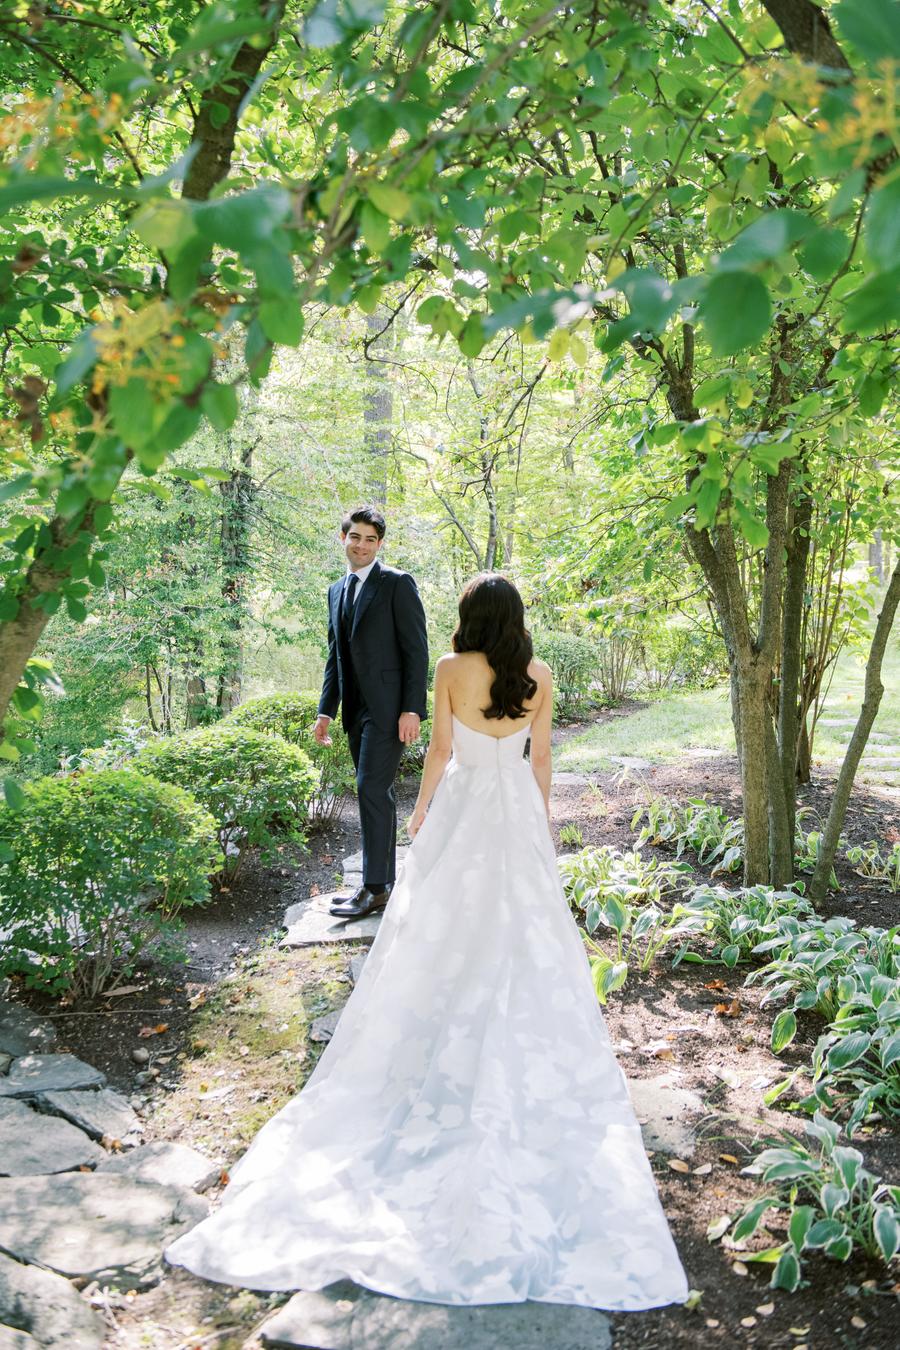 Romantic Upstate New York Wedding With Intimate Details And The Couple ...